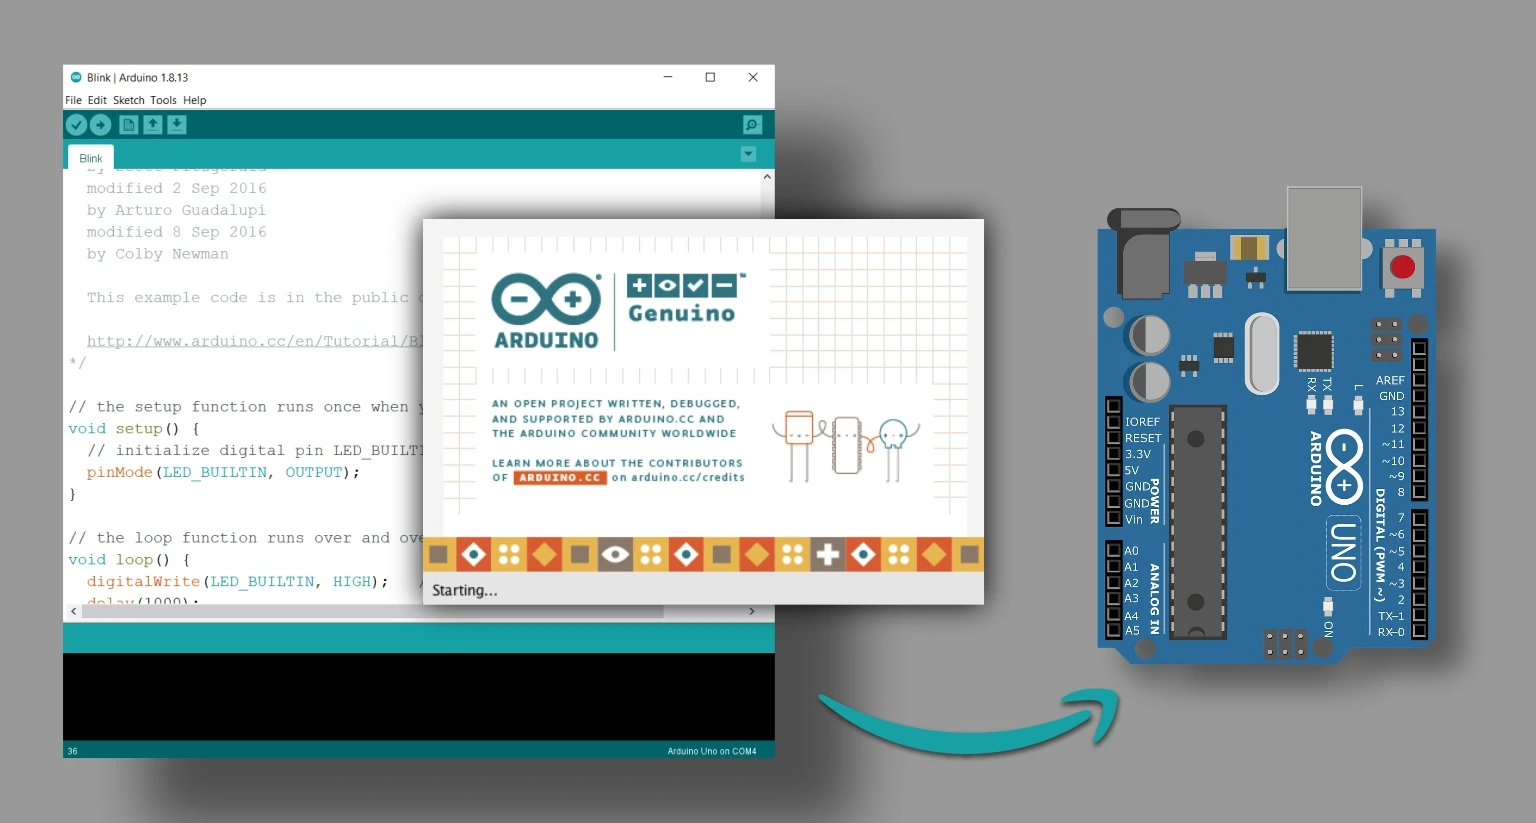 Getting started with Arduino IDE, Featured image consist of Arduino IDE starting view and Arduino uno board